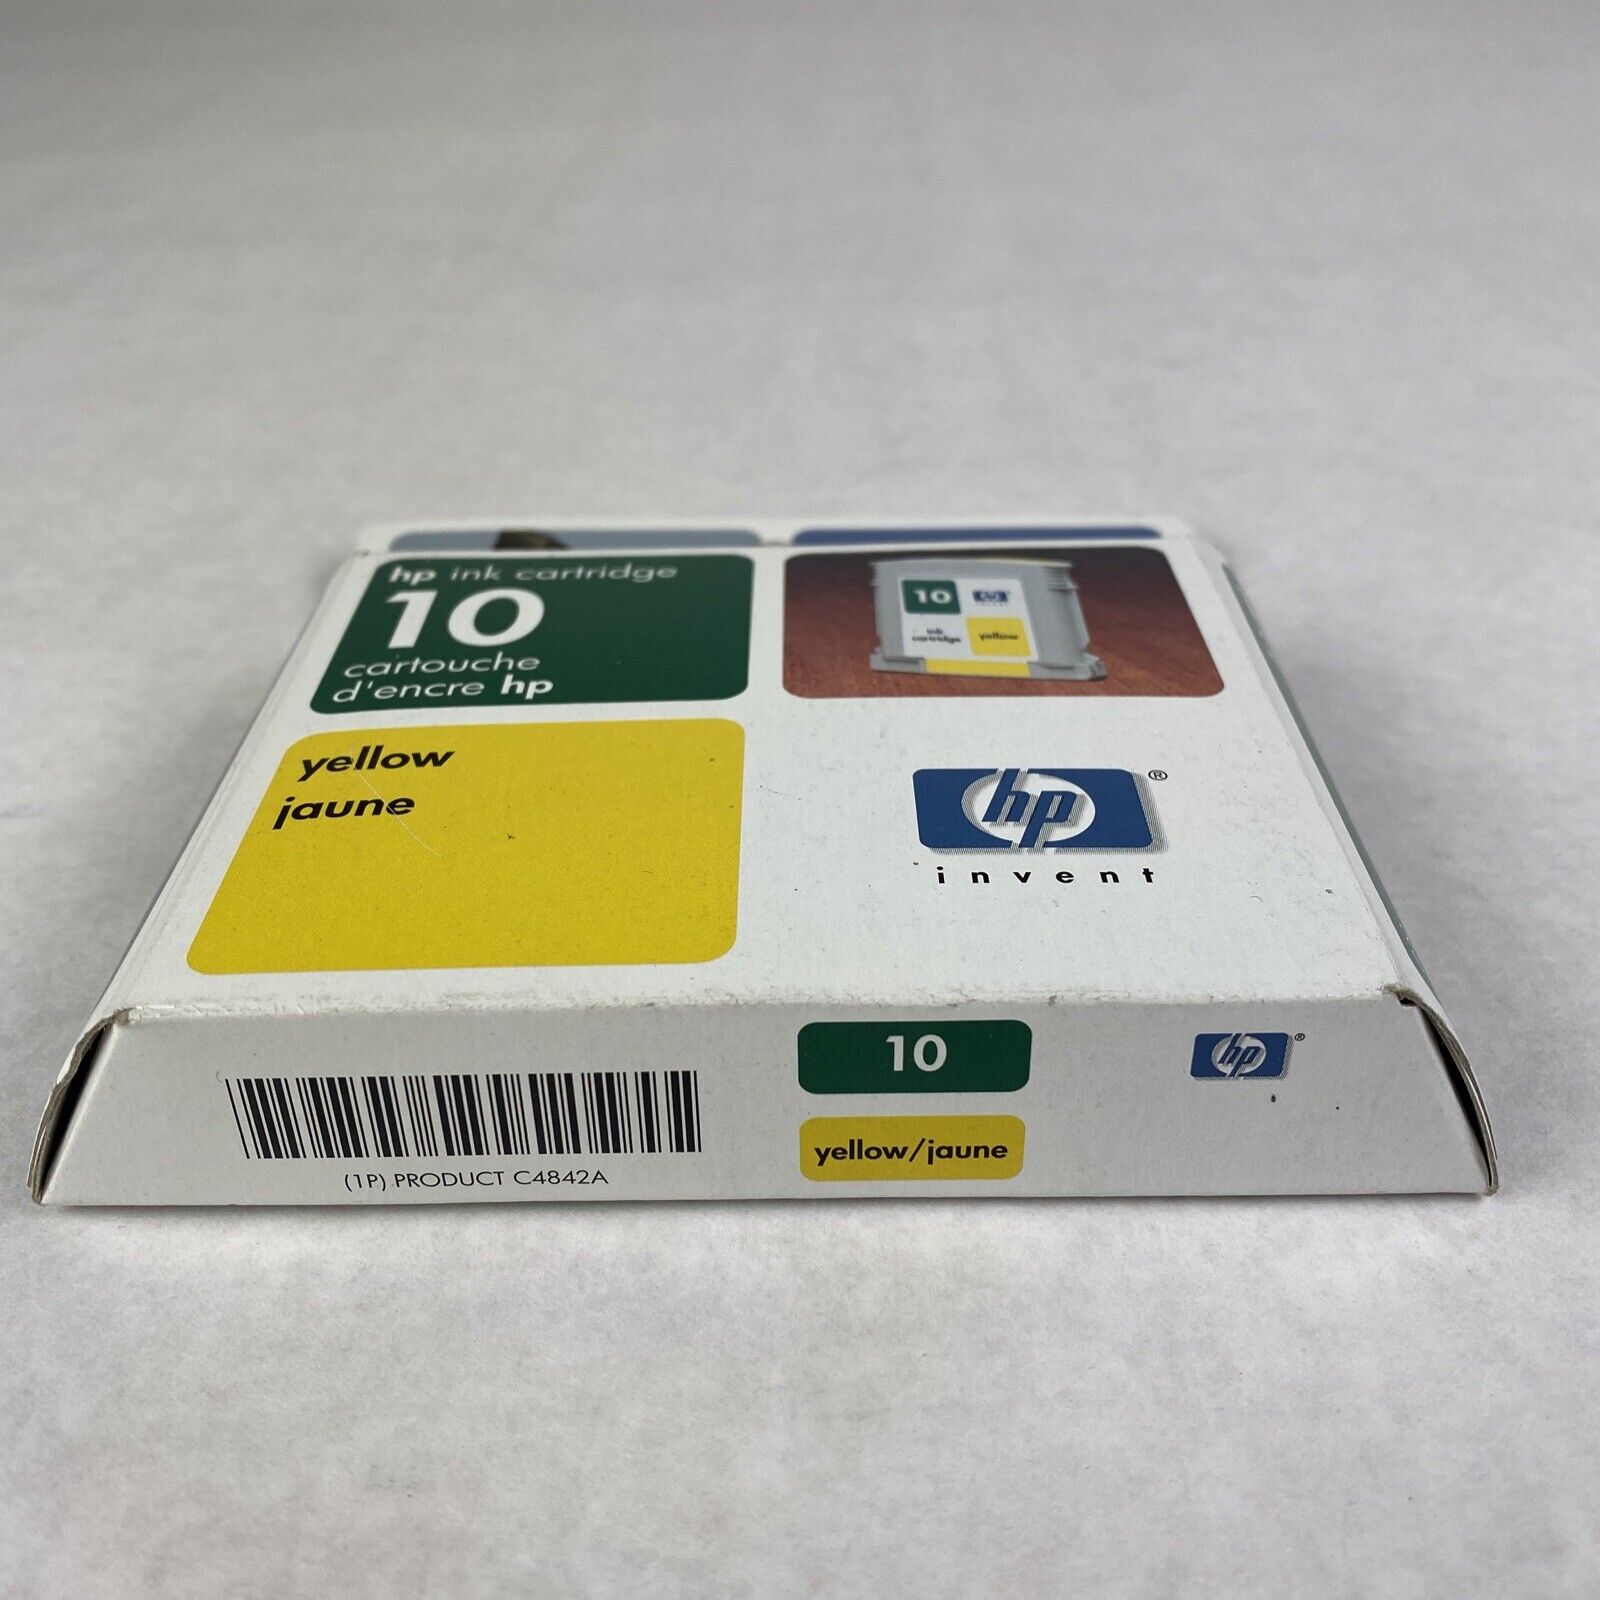 HP C4842A 10 Ink Cartridge designjet Yellow juane color expired 2005